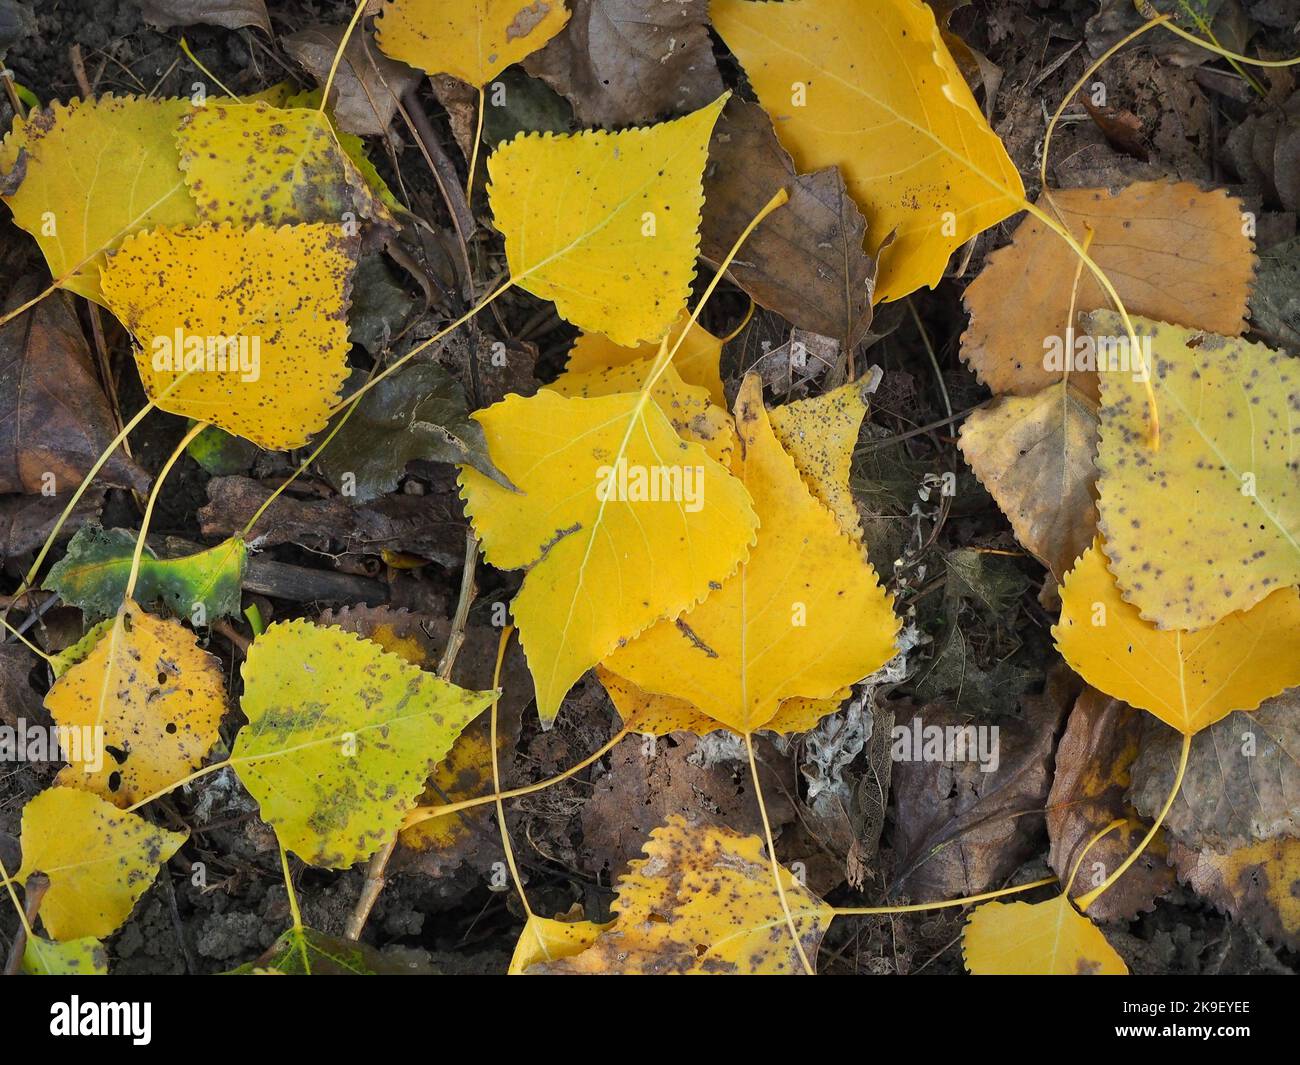 Autumn dried up leaves Stock Photo